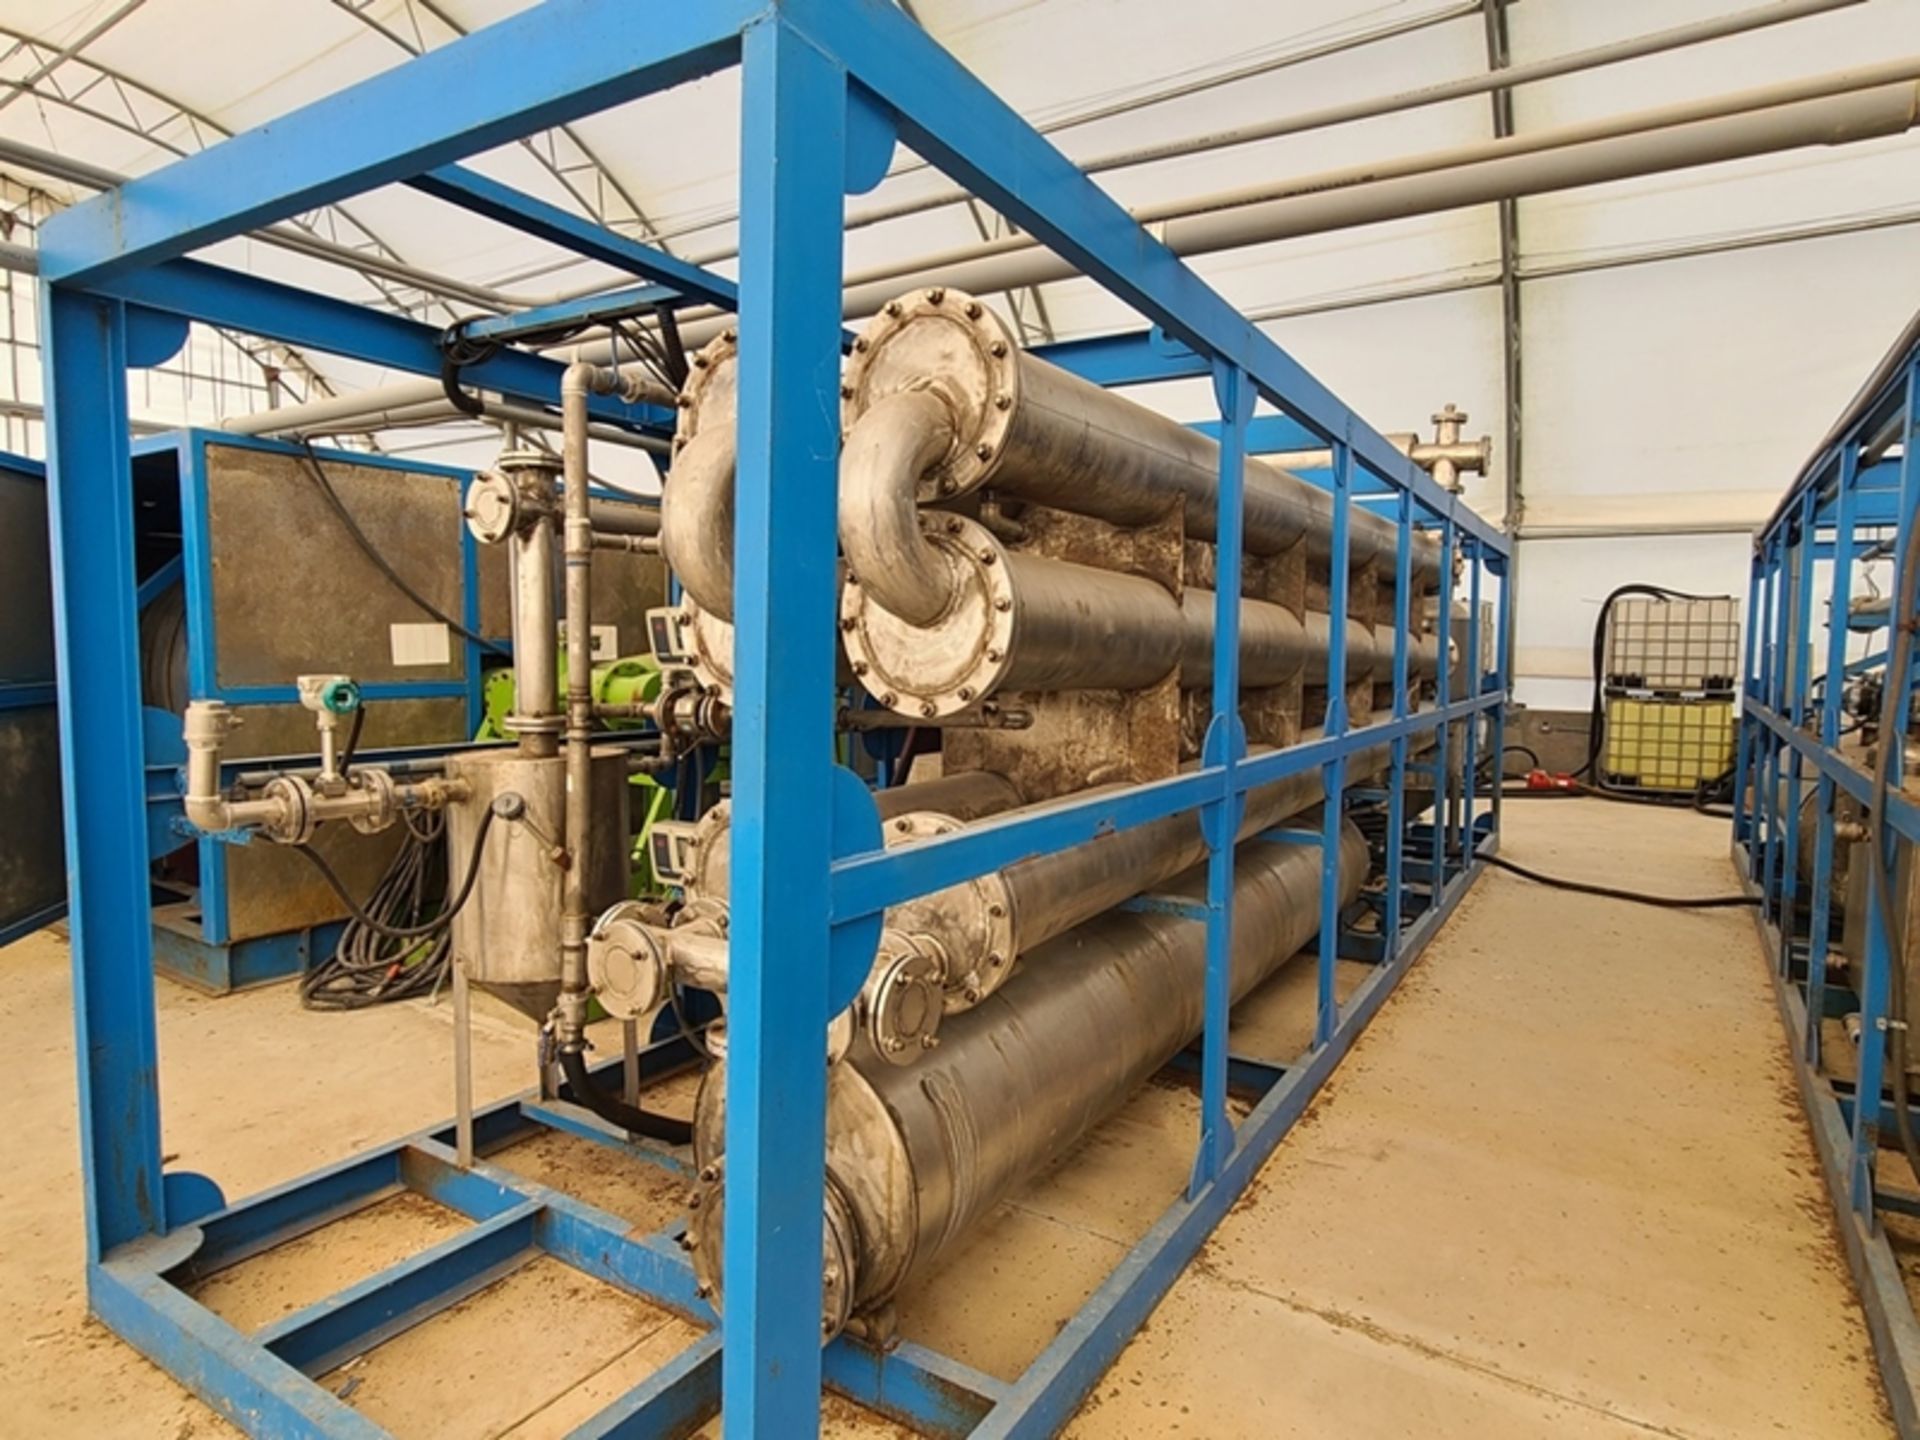 BIOMETHANE PRODUCTION EQUIPMENT - (2) CLEANBLUE BioFarma separation units with controls, (1) CLEANBL - Image 21 of 34